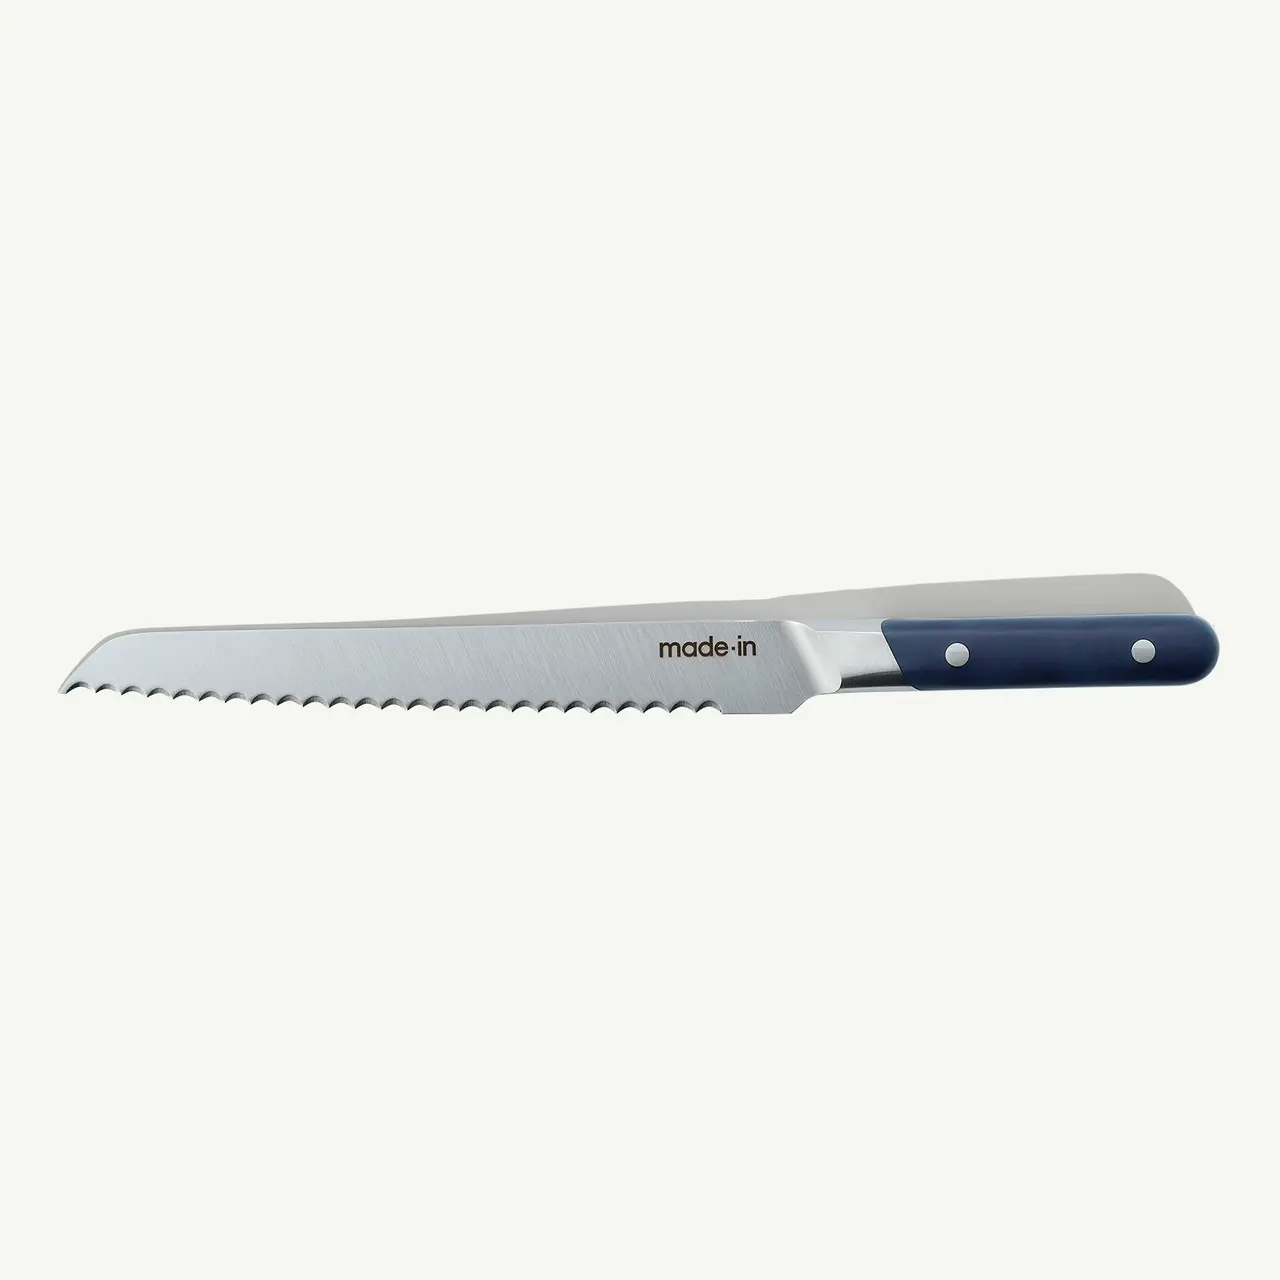 A serrated bread knife with a blue and black handle on a white background.